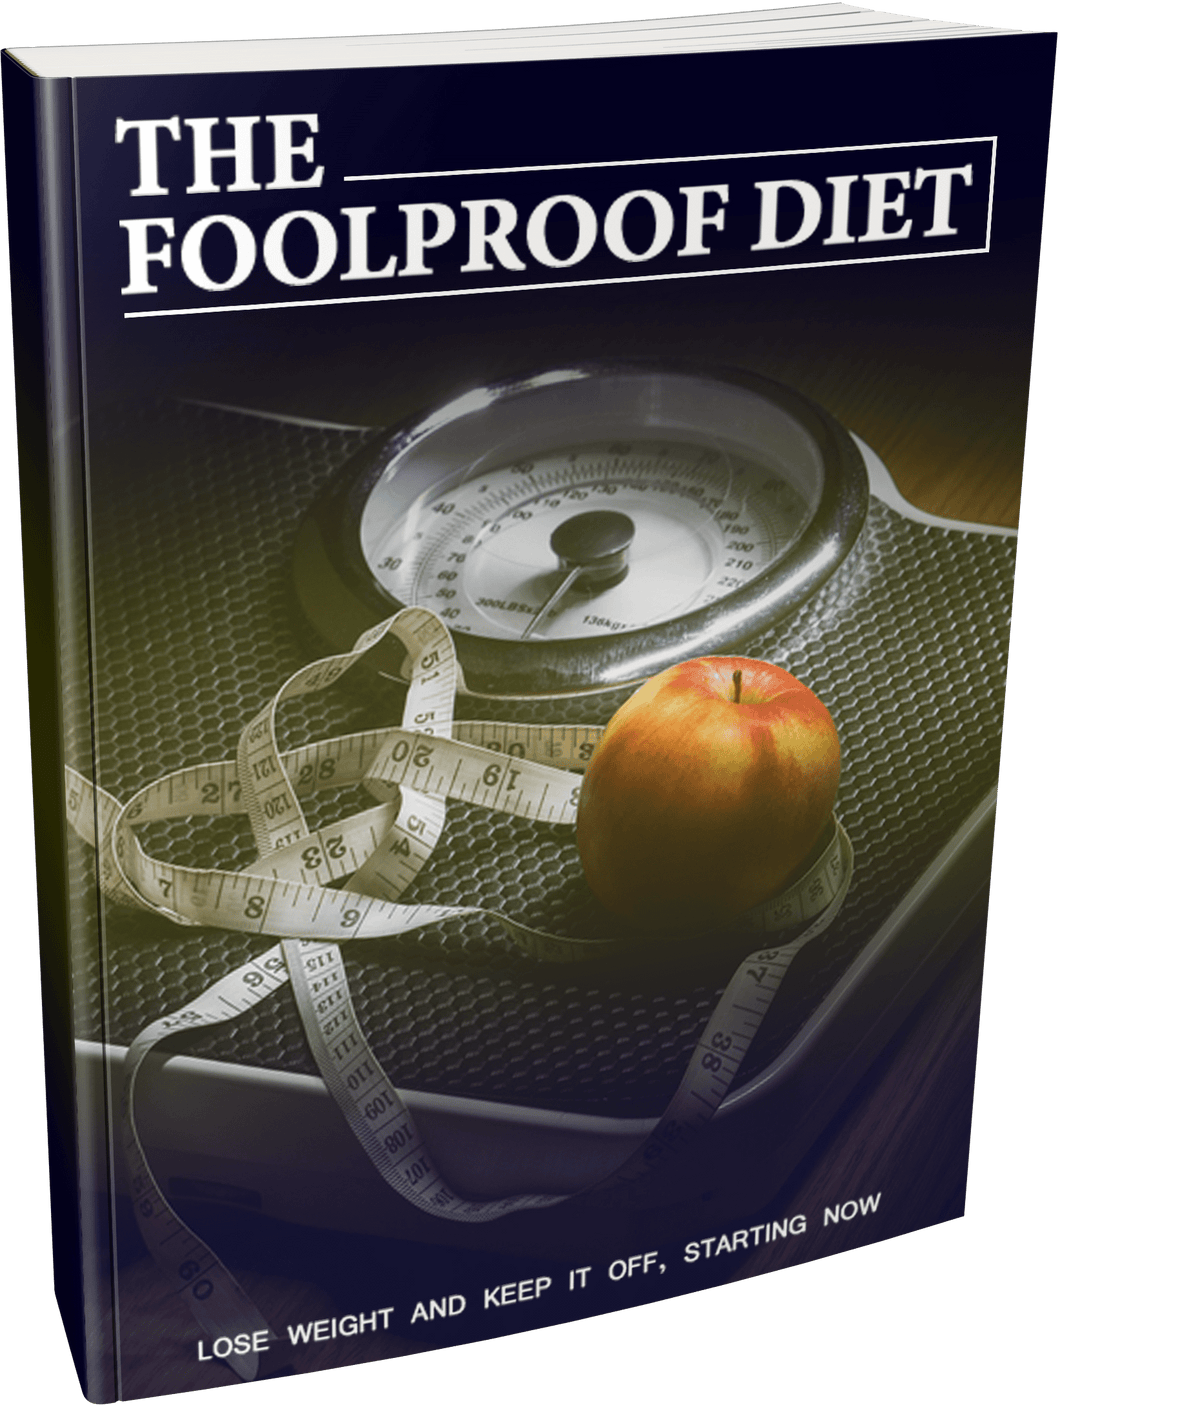 The Foolproof Diet Guide